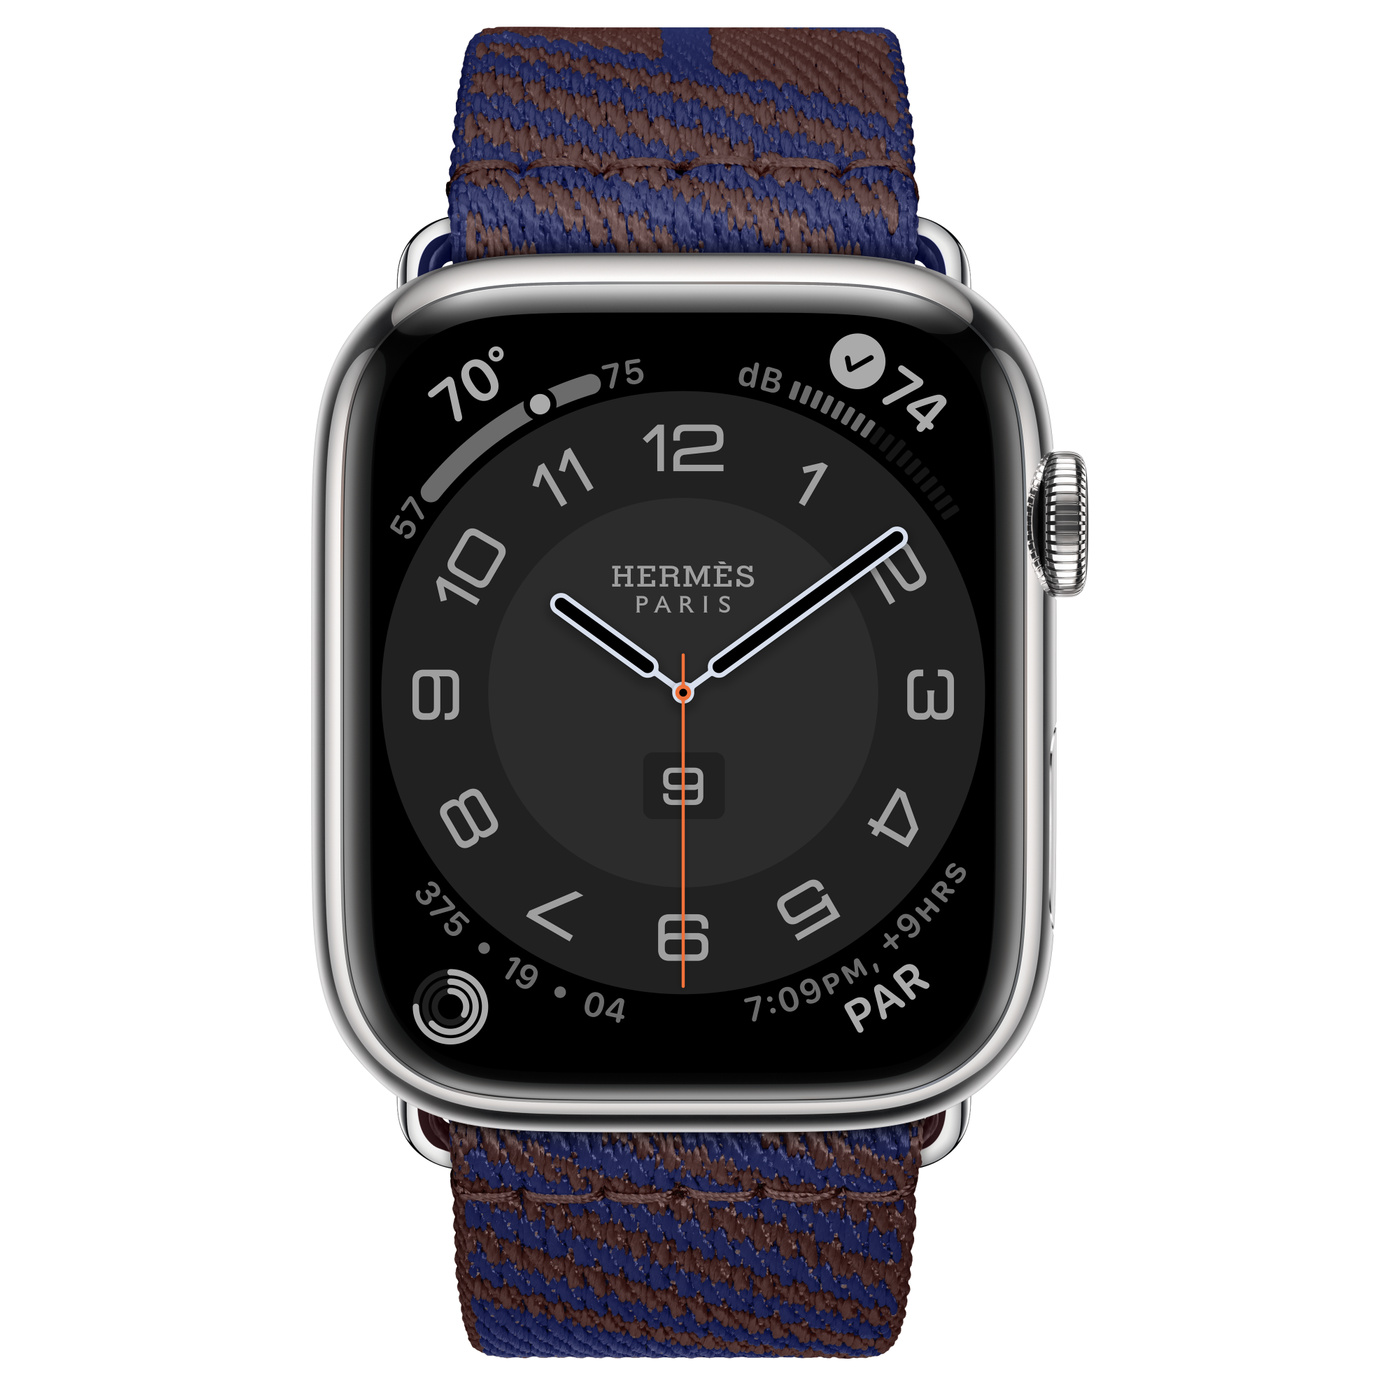 Apple Watch Series 8 Hermès, 45mm Silver Stainless Steel Case with Jumping Single Tour - Rouge Sellier/Bleu Saphir